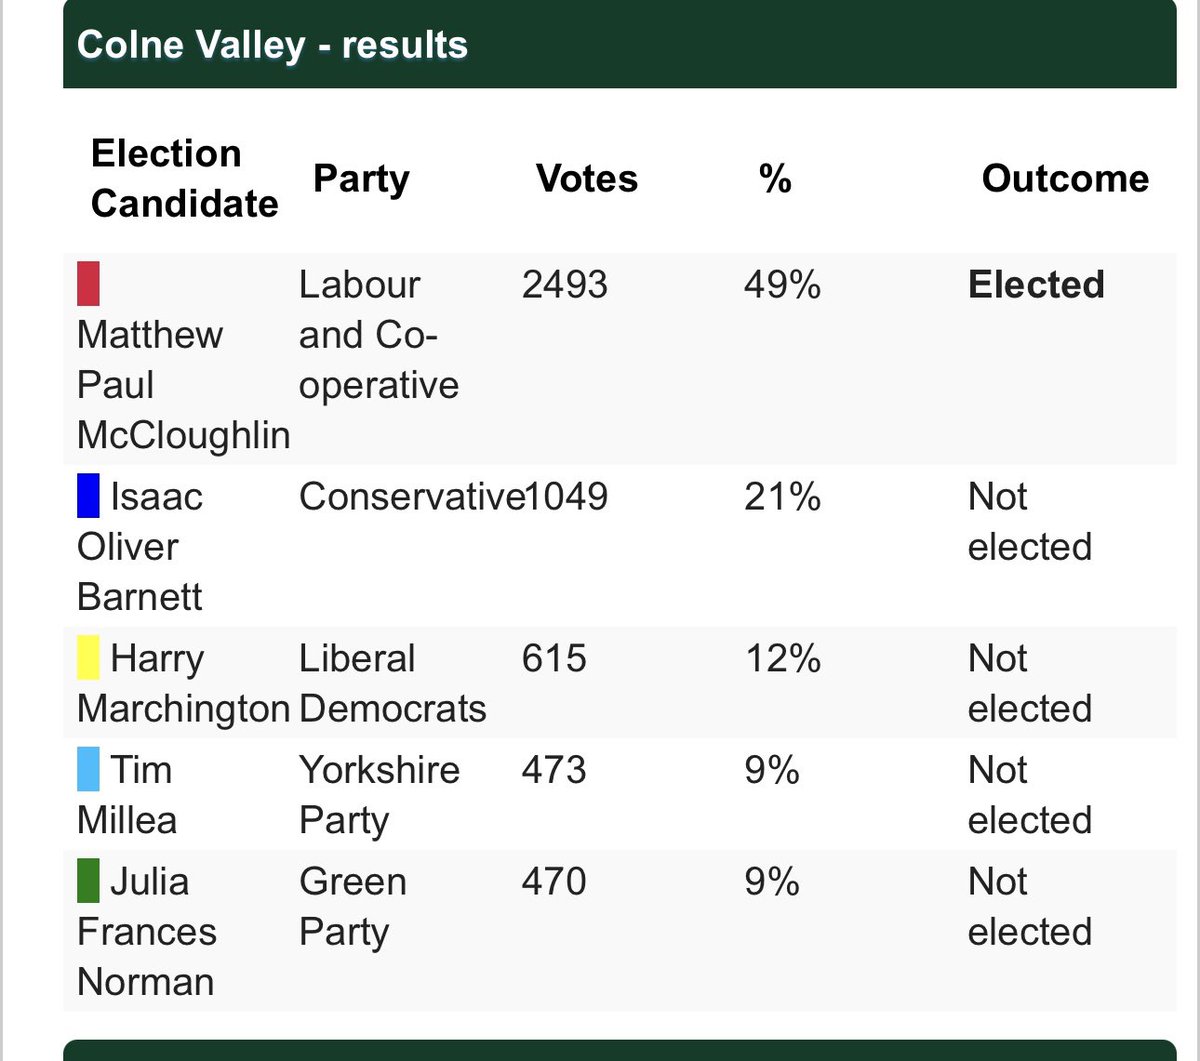 Looks like @ColneValleyCons have lost in Colne Valley seat. Aww shame. Commiserations @JasonMcCartney. 🥲🥲🥲😂😂😂